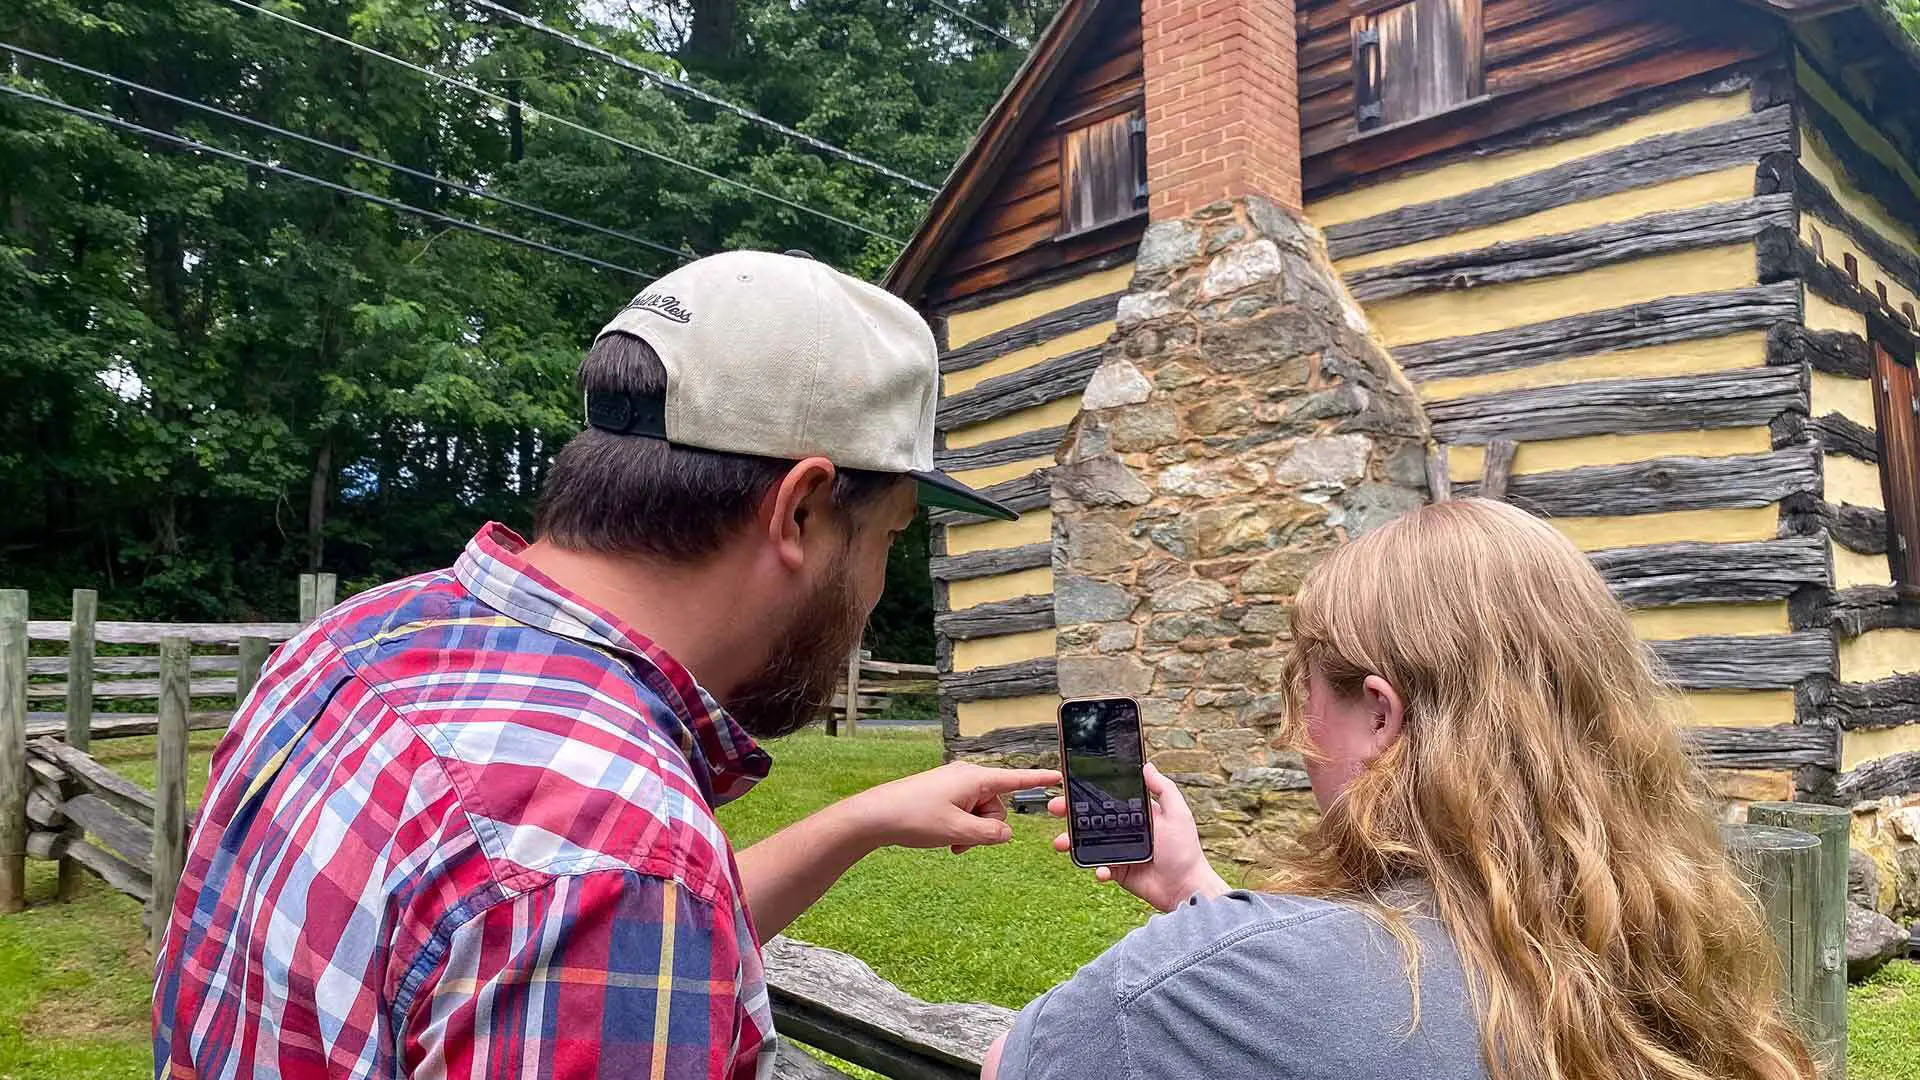 Two people looking at a phone with a wooden cabin in the background